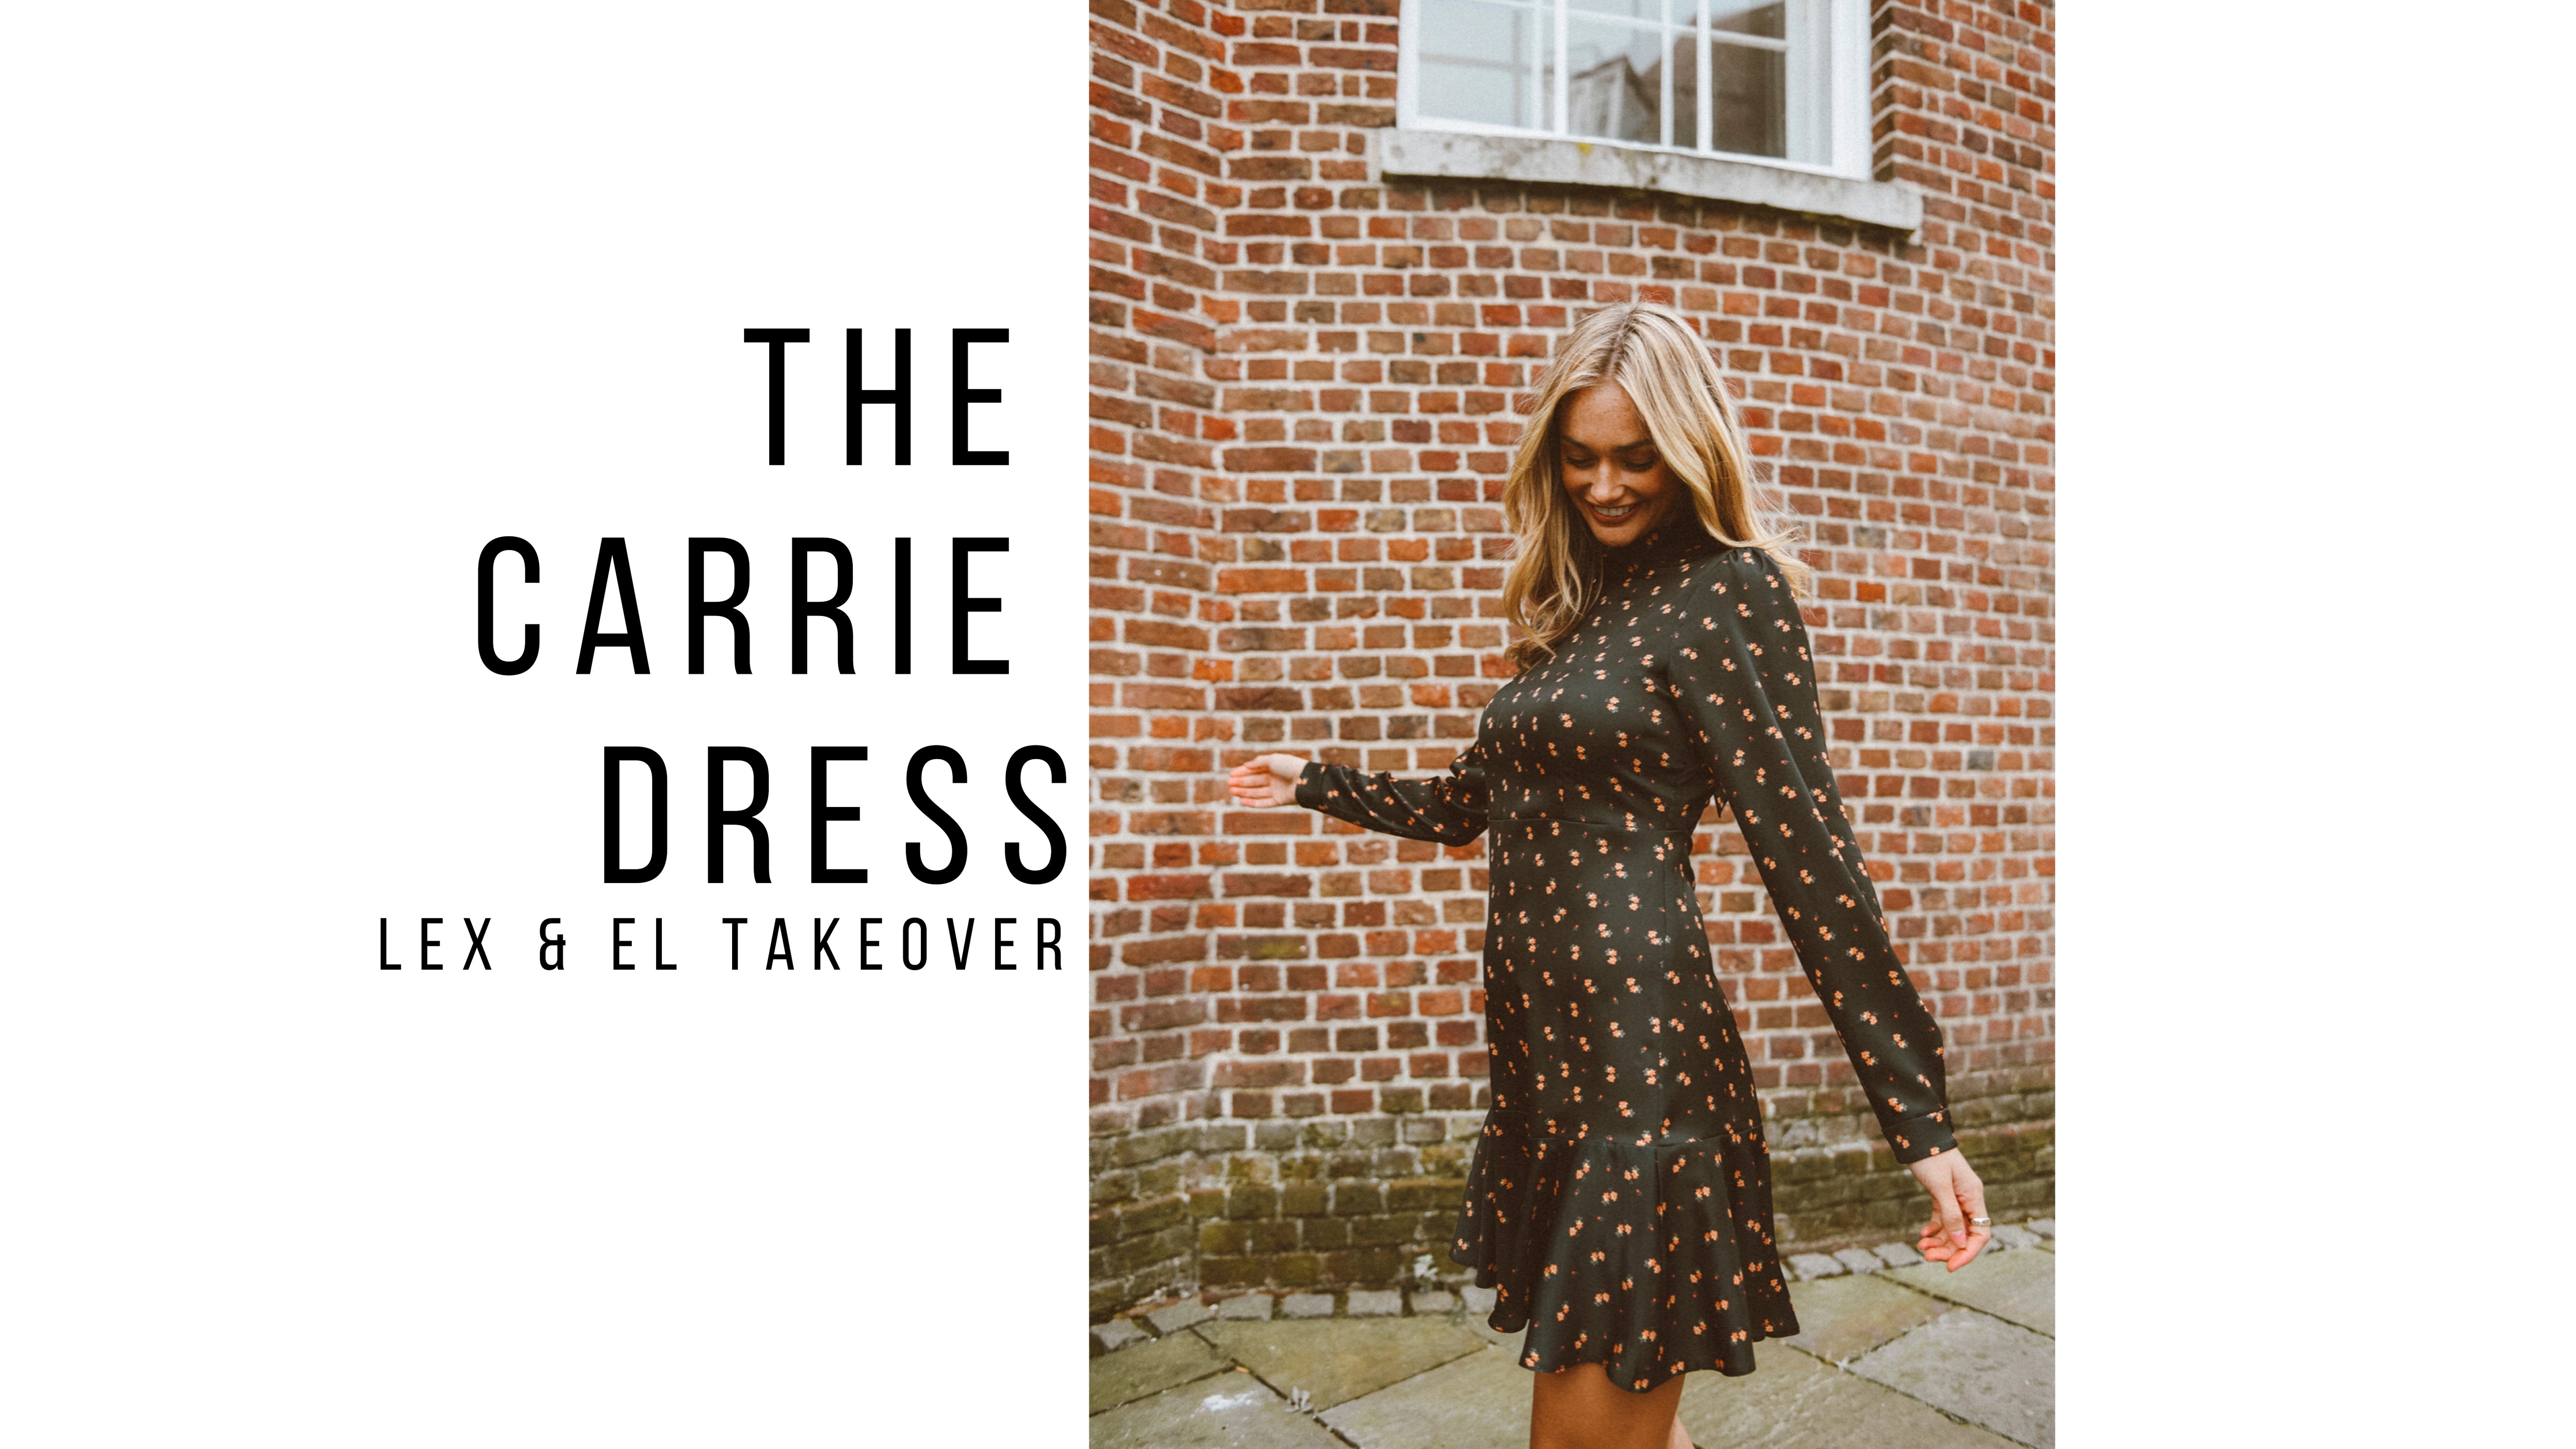 THE CARRIE DRESS